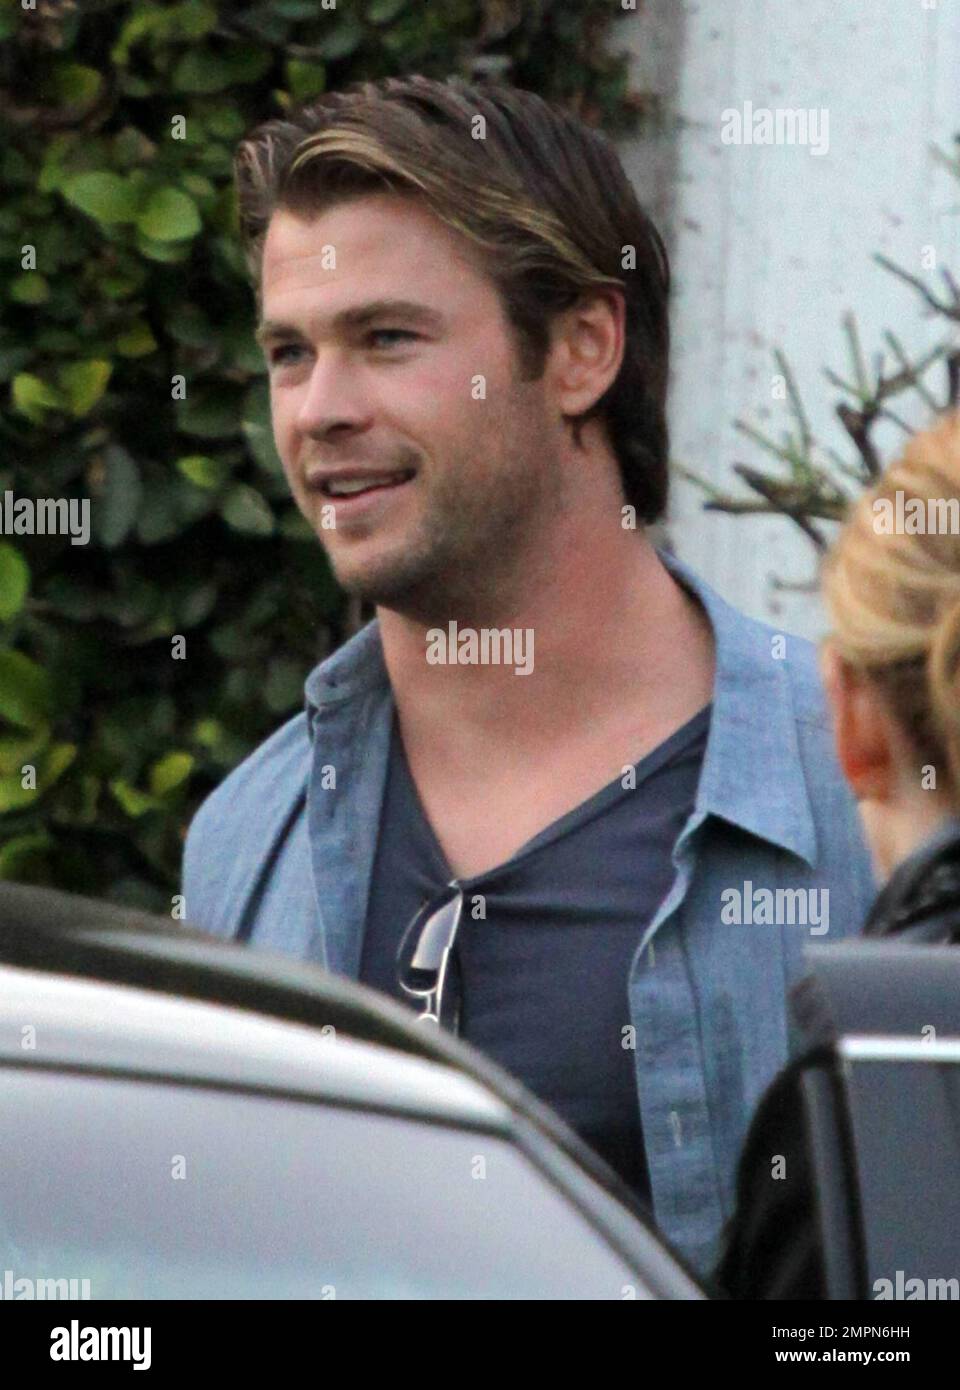 EXCLUSIVE!! Actor Chris Hemsworth carries a variety of shirts as he leaves an all day photo shoot, presumably in connection with his upcoming film 'Thor'.  Despite looking a bit tired as he wiped his eyes Chris also looked in good spirits as he appeared to pose for a picture with crew while 'Thor' director Kenneth Branagh got in to a waiting limo.  At one point police were seen responding to theatrical smoke effects that billowed from the photography studio.  'Thor' is due out this spring and co-stars Natalie Portman and Anthony Hopkins. Los Angeles, CA. 01/29/11. Stock Photo